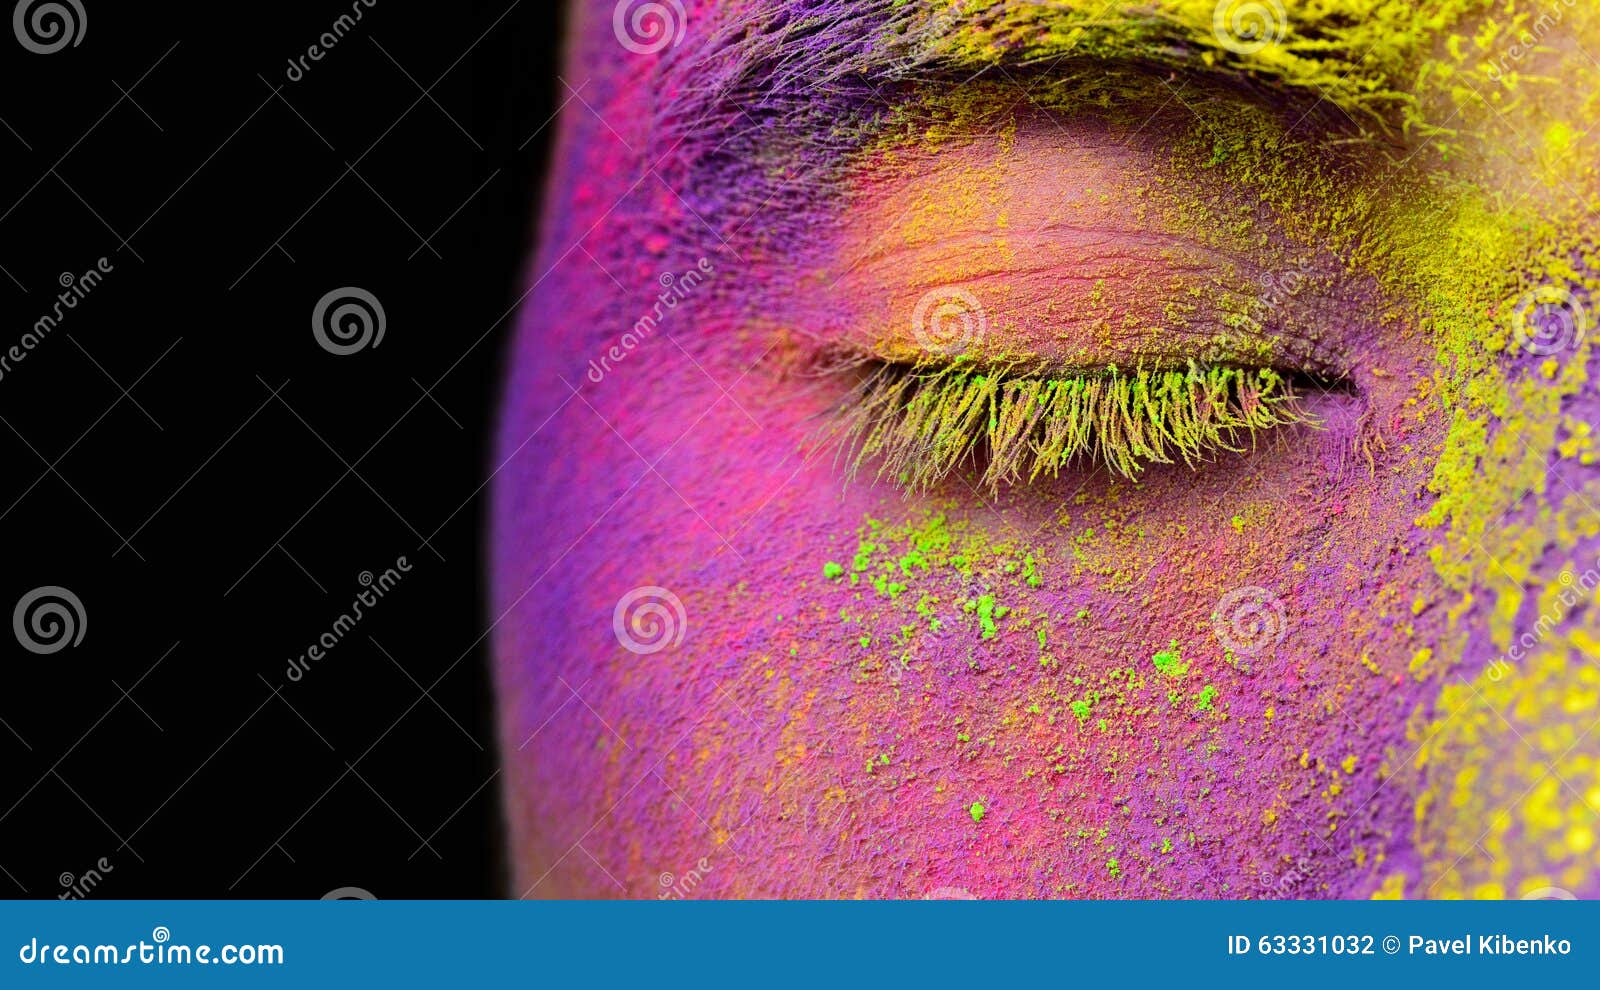 Makeup Brush Covered With Bright Holi Dry Powder Paint Stock Photo